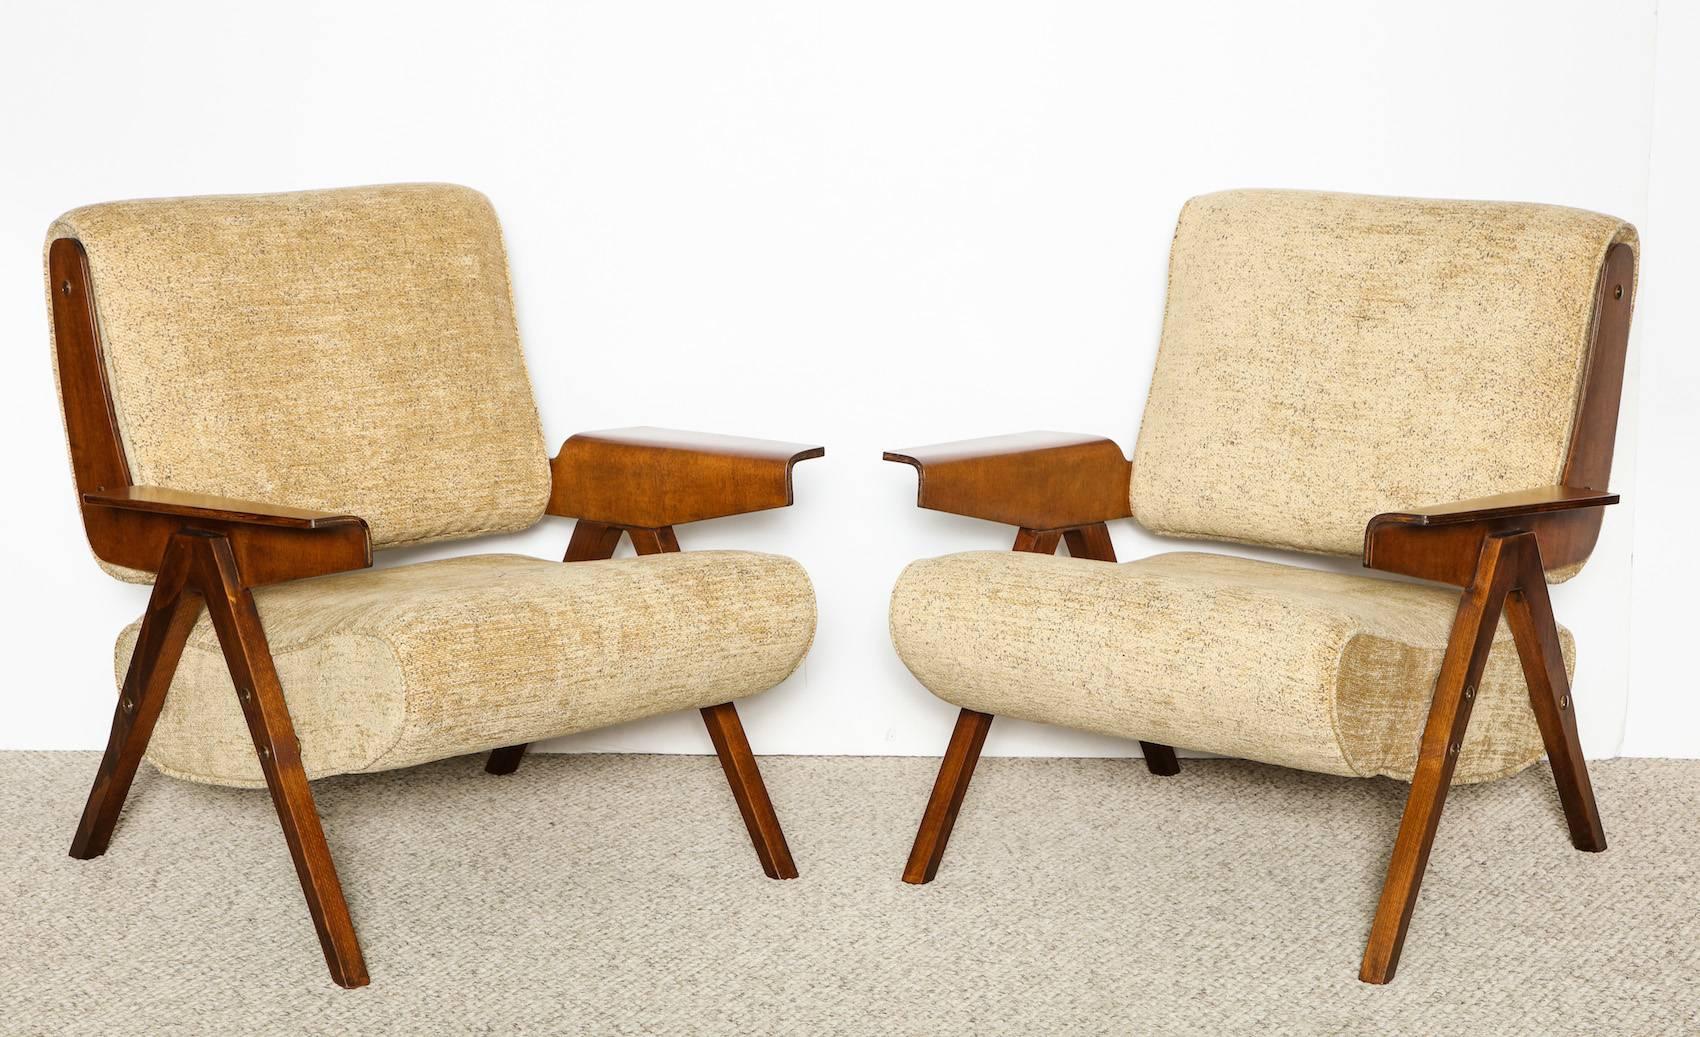 Rare pair of 831 lounge chairs by Gianfranco Frattini for Cassina.
Bentwood forms with brass mounts and pale chenille upholstery. A rare model, and a great architectural design.
Provenance: Piccolo Hotel, Savona, Italy.